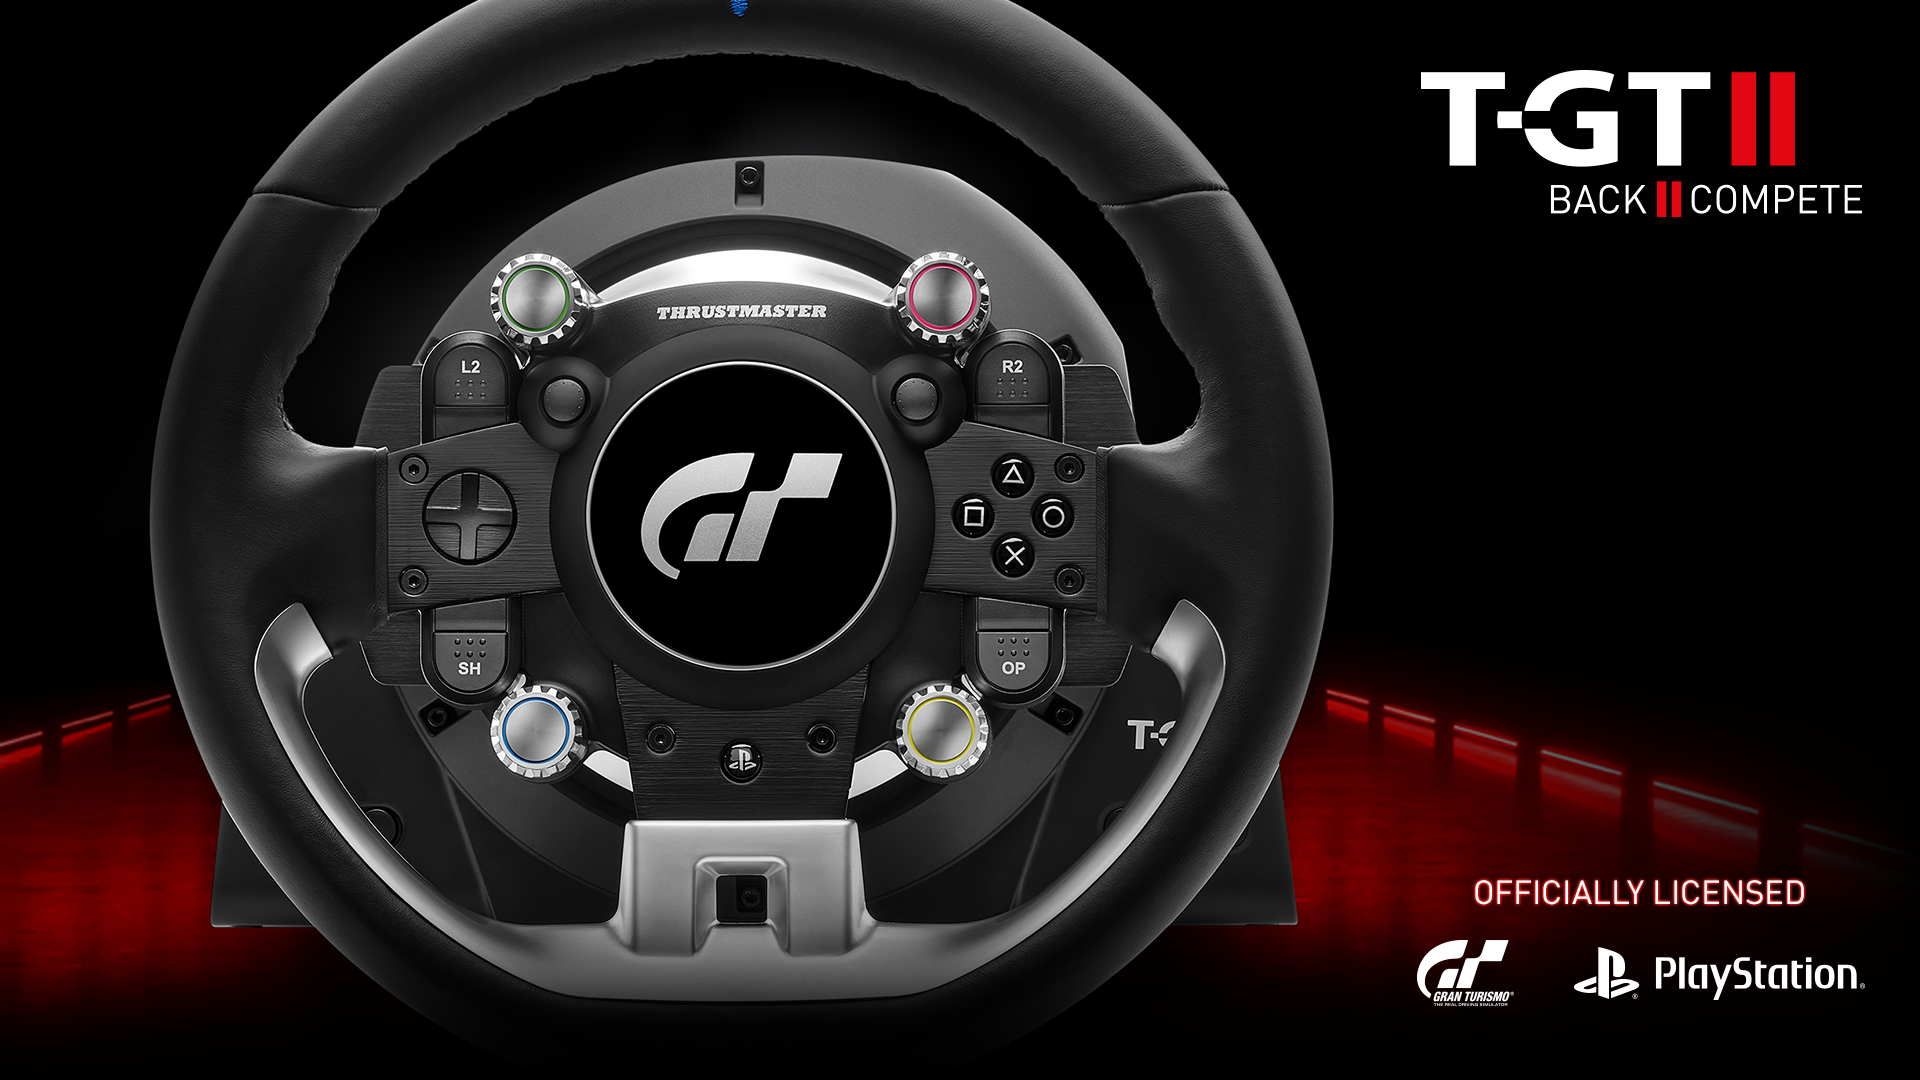 Avenue slange Hverdage Which racing wheel should you choose to play Gran Turismo 7? - Thrustmaster